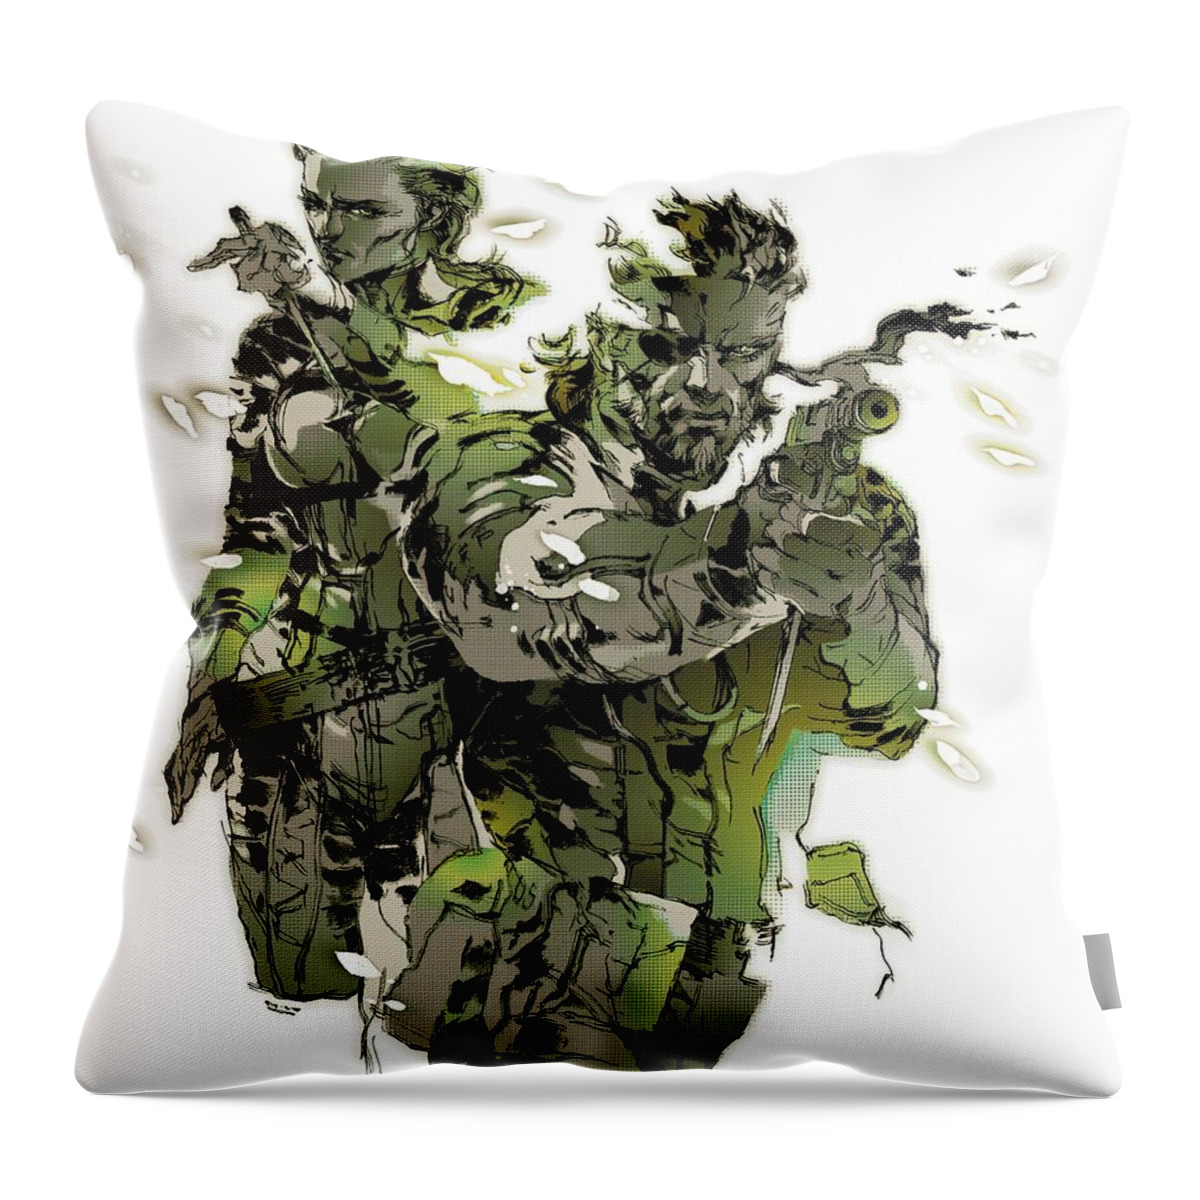  Living Room Throw Pillow featuring the painting Metal Gear Solid 3 Snake and The Boss by Hall Logan